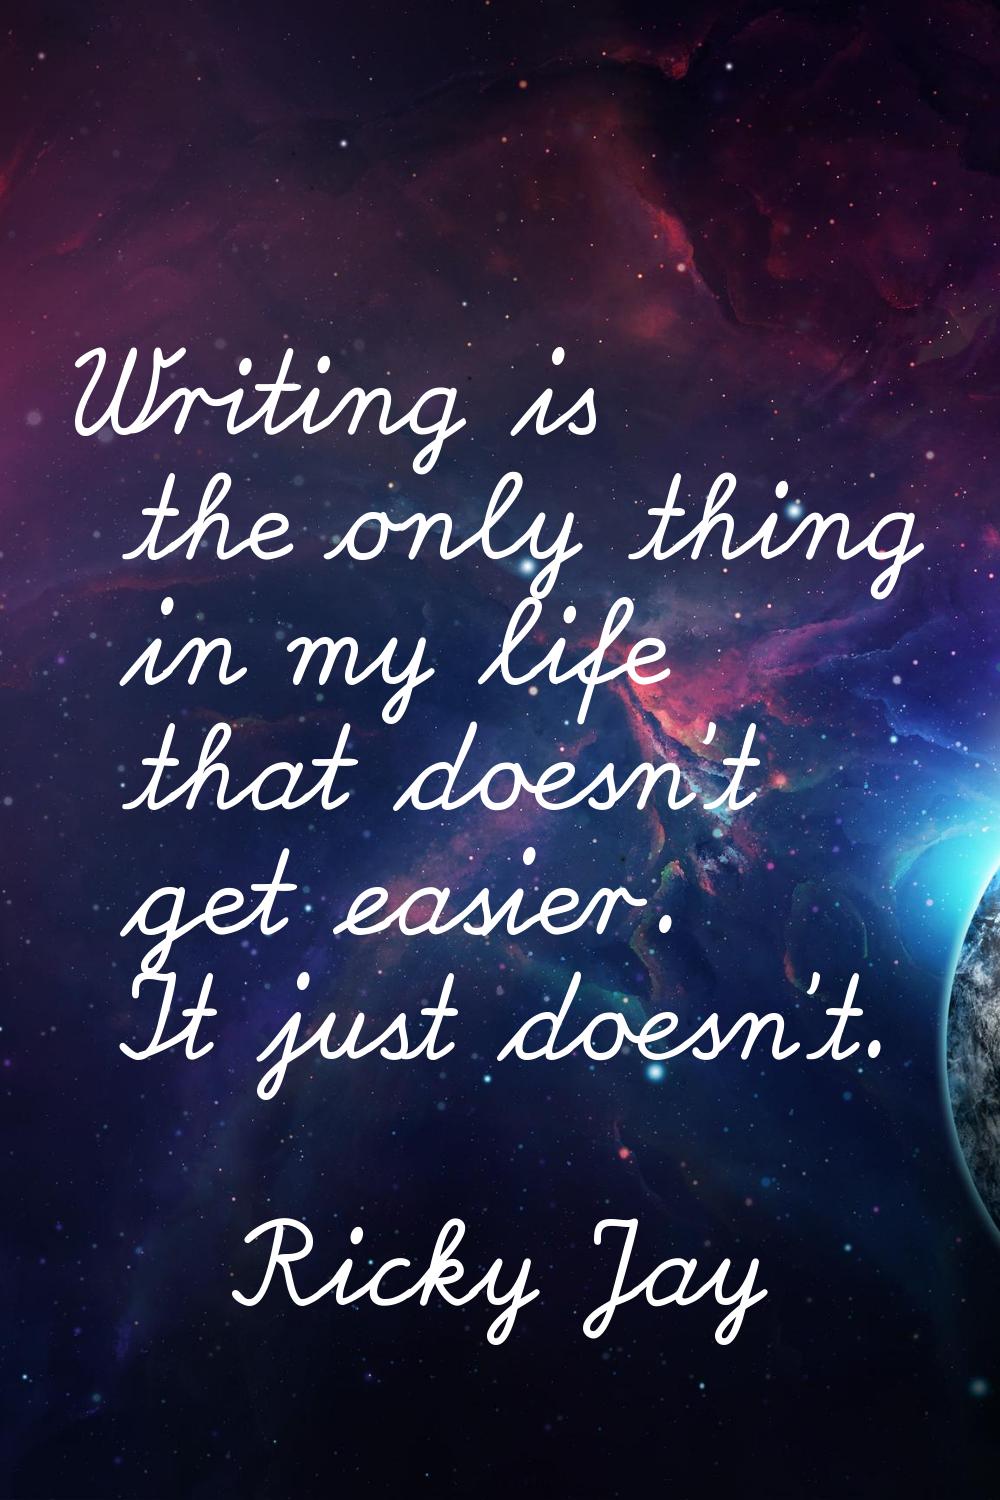 Writing is the only thing in my life that doesn't get easier. It just doesn't.